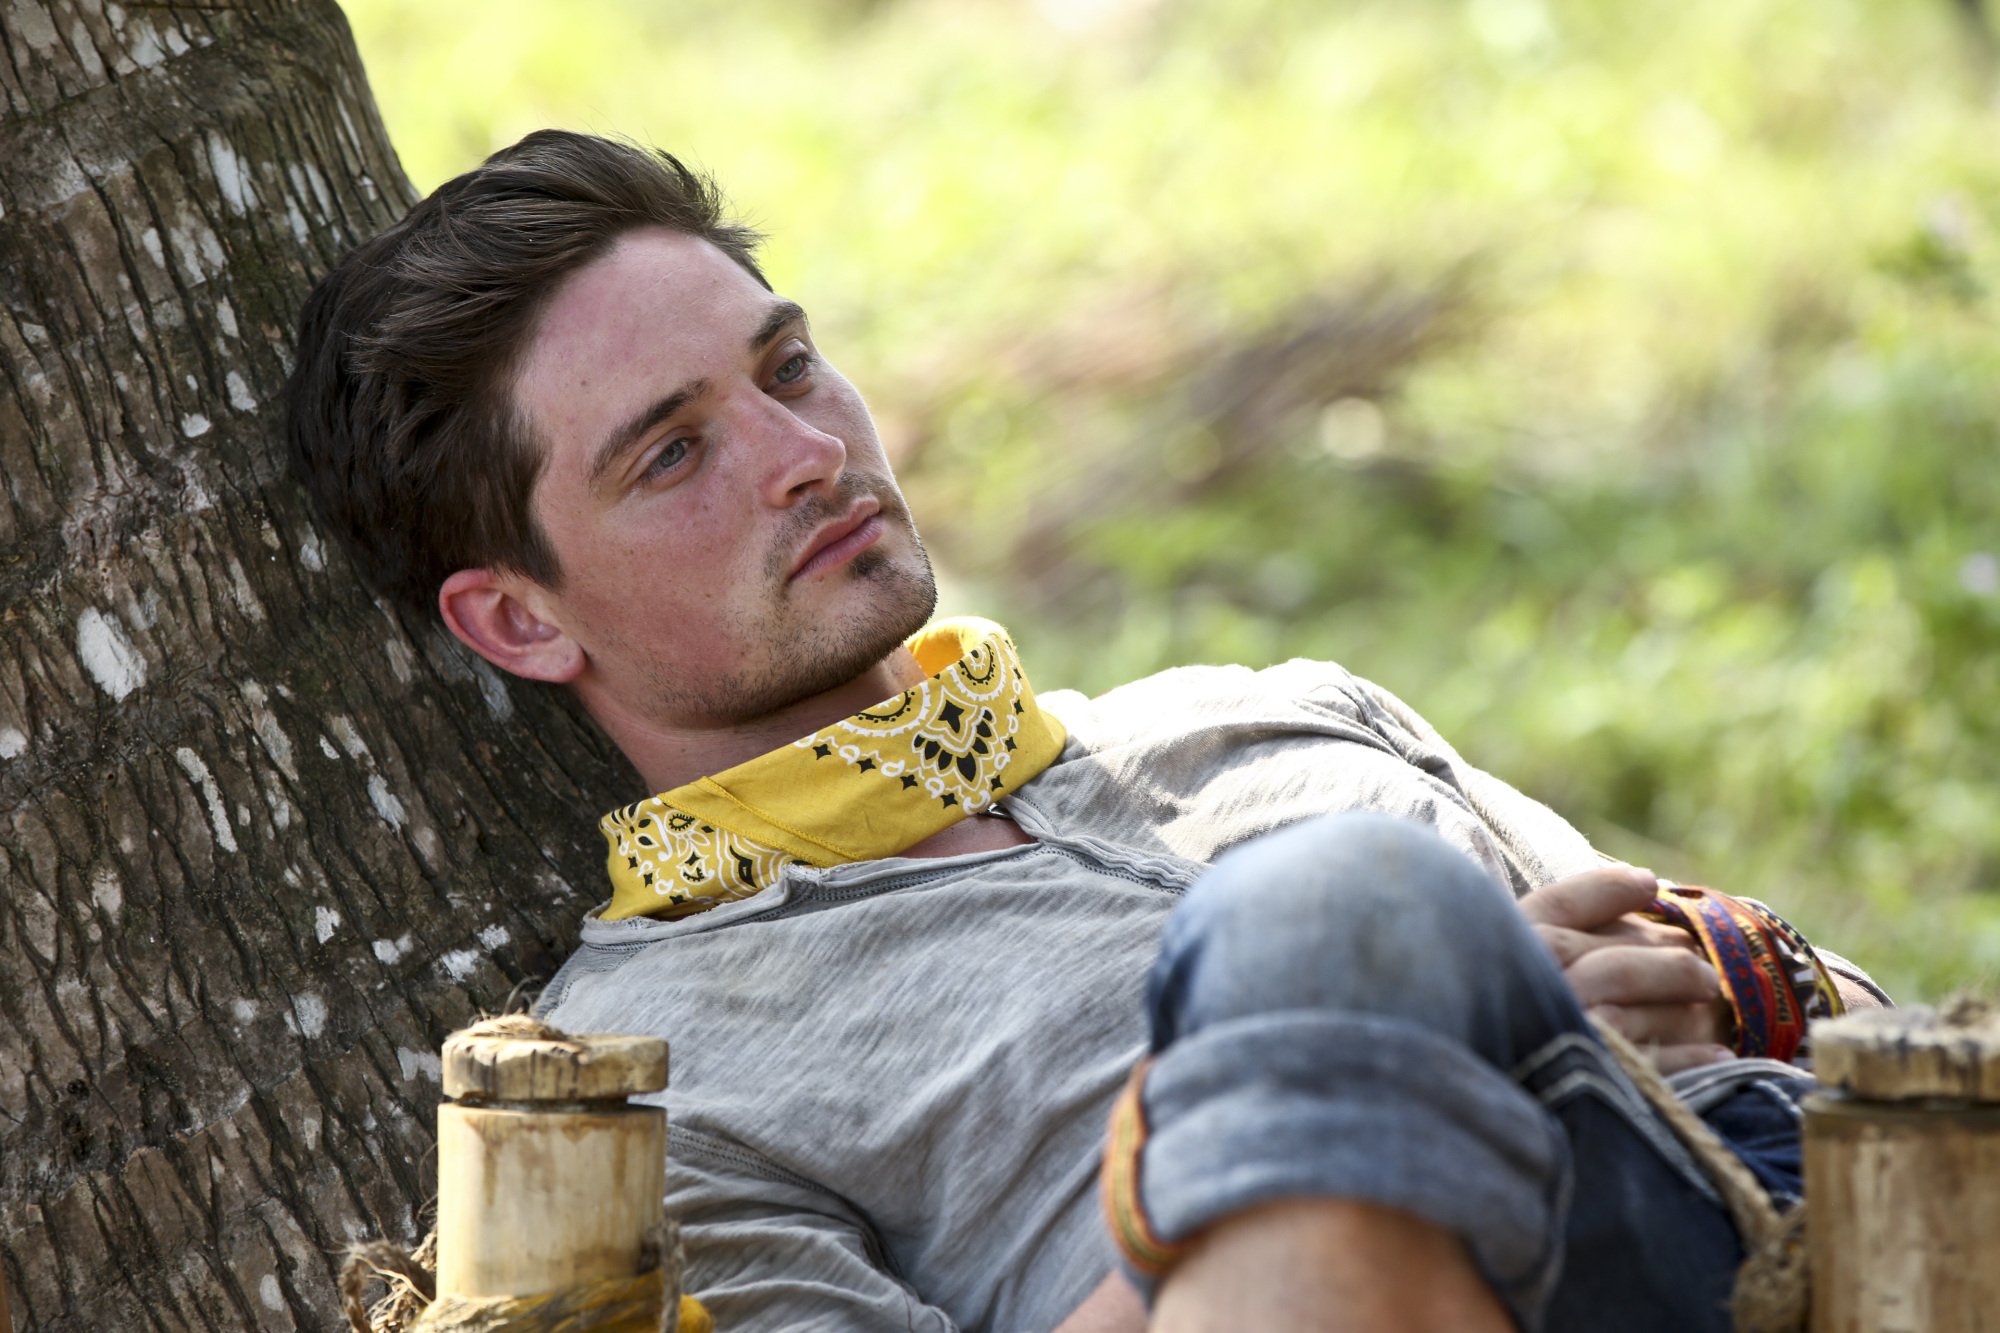 Caleb Reynolds, who starred in 'Survivor' Season 32 on CBS, wears a light gray henley shirt, rolled up jeans, and a yellow bandana around his neck.